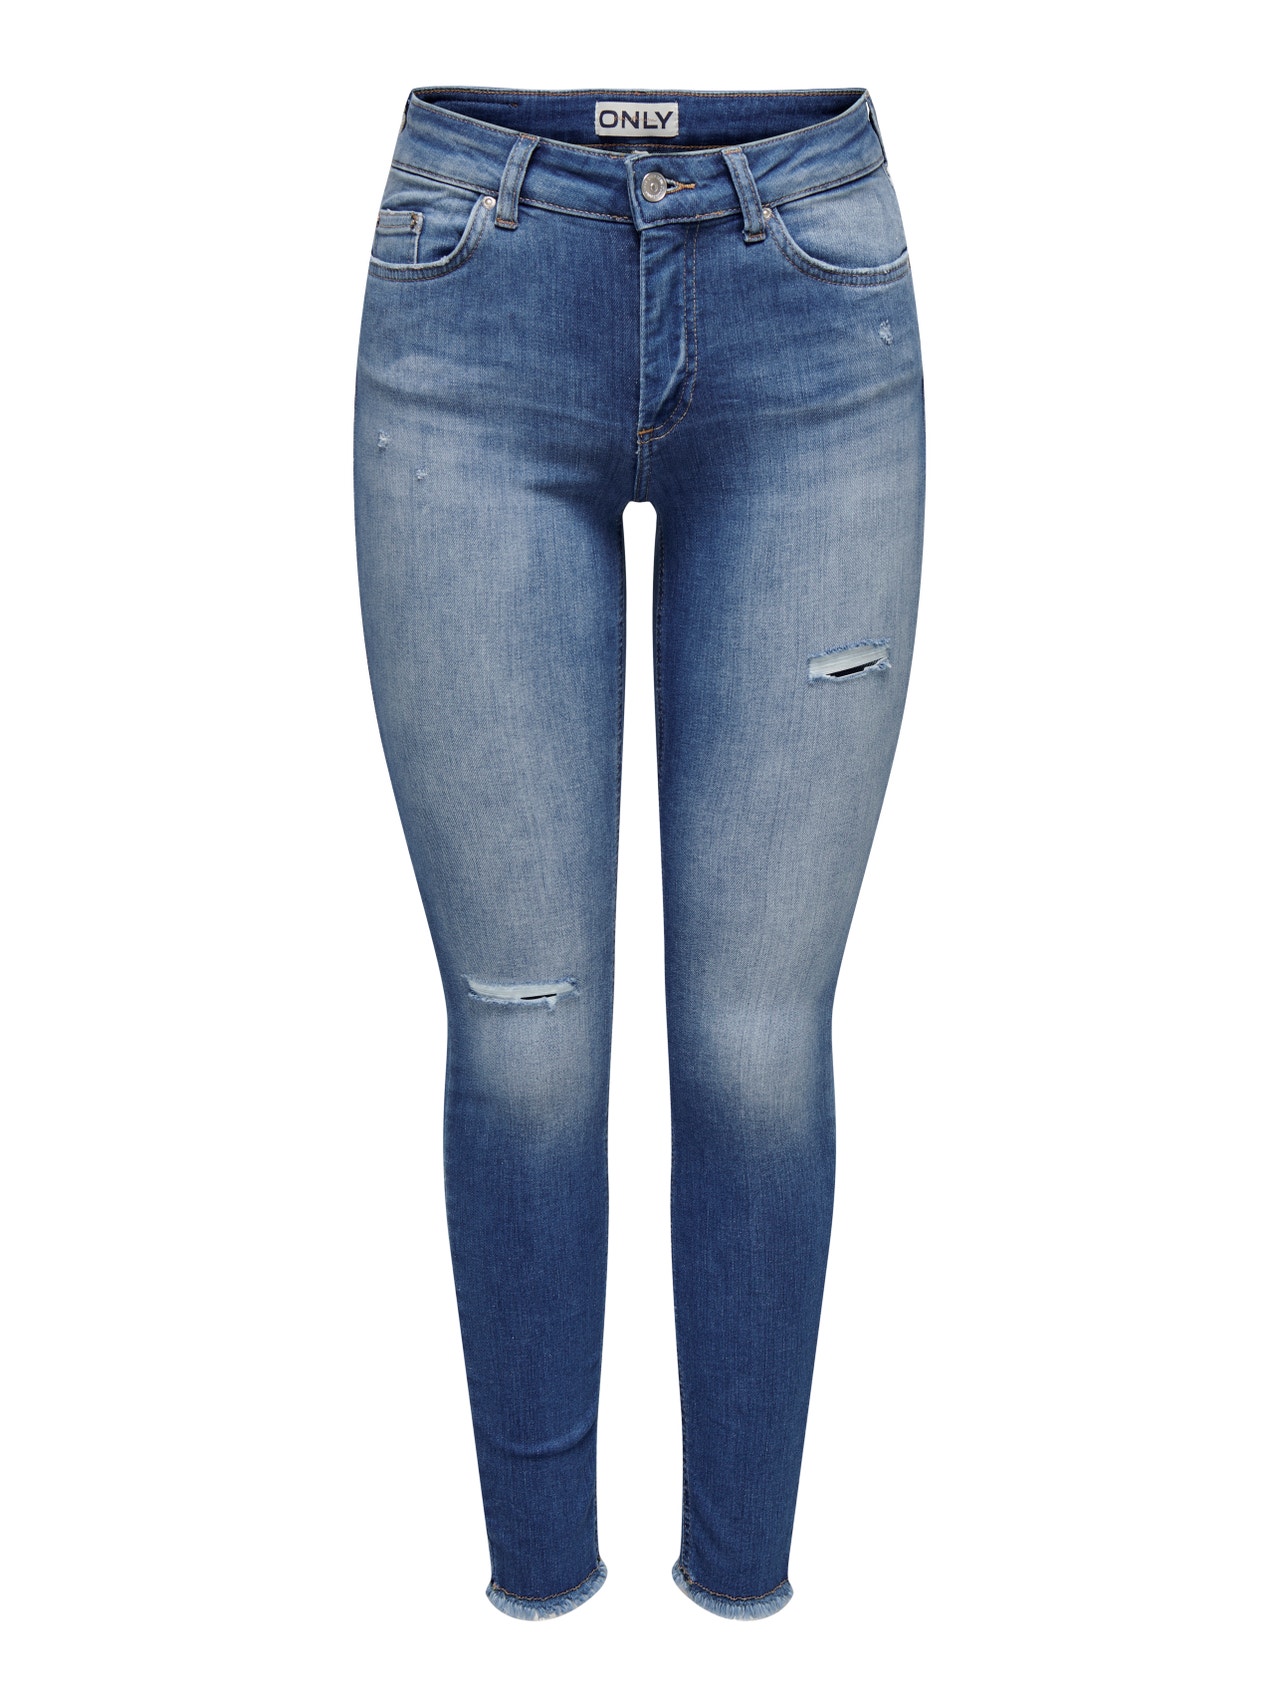 ONLY Jeans Skinny Fit Taille moyenne Ourlet brut -Medium Blue Denim - 15282335